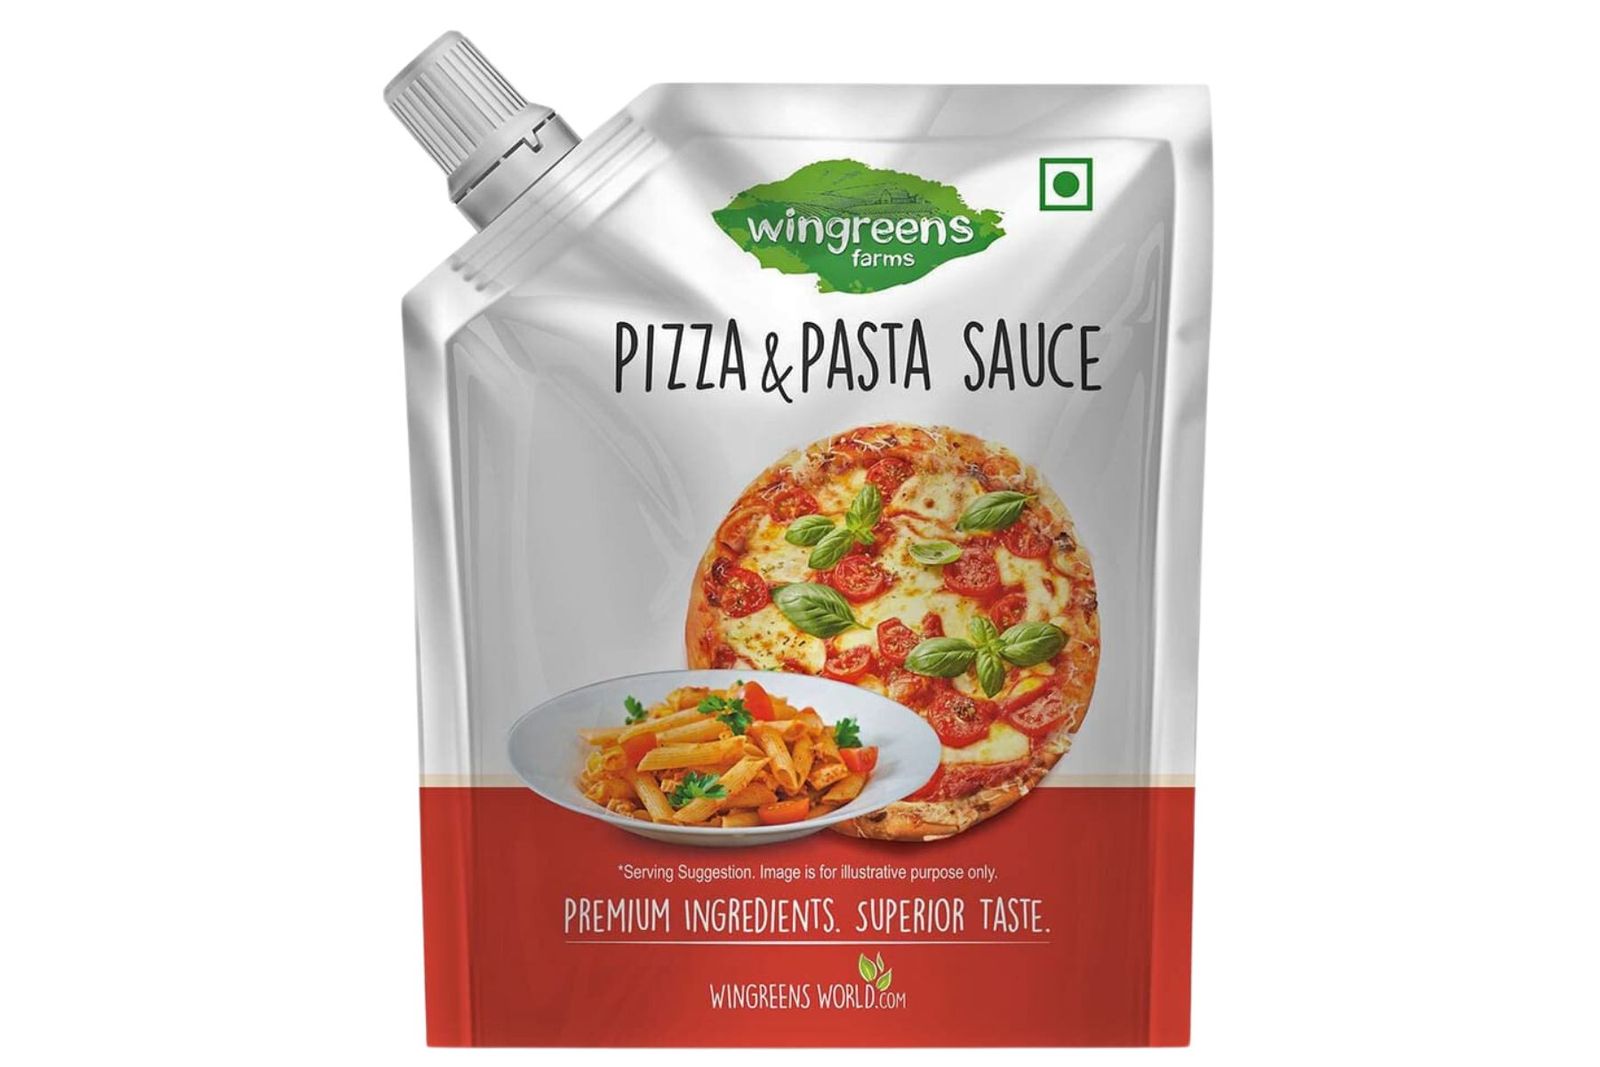 Wingreens Farms Pizza & Pasta Sauce Pouch